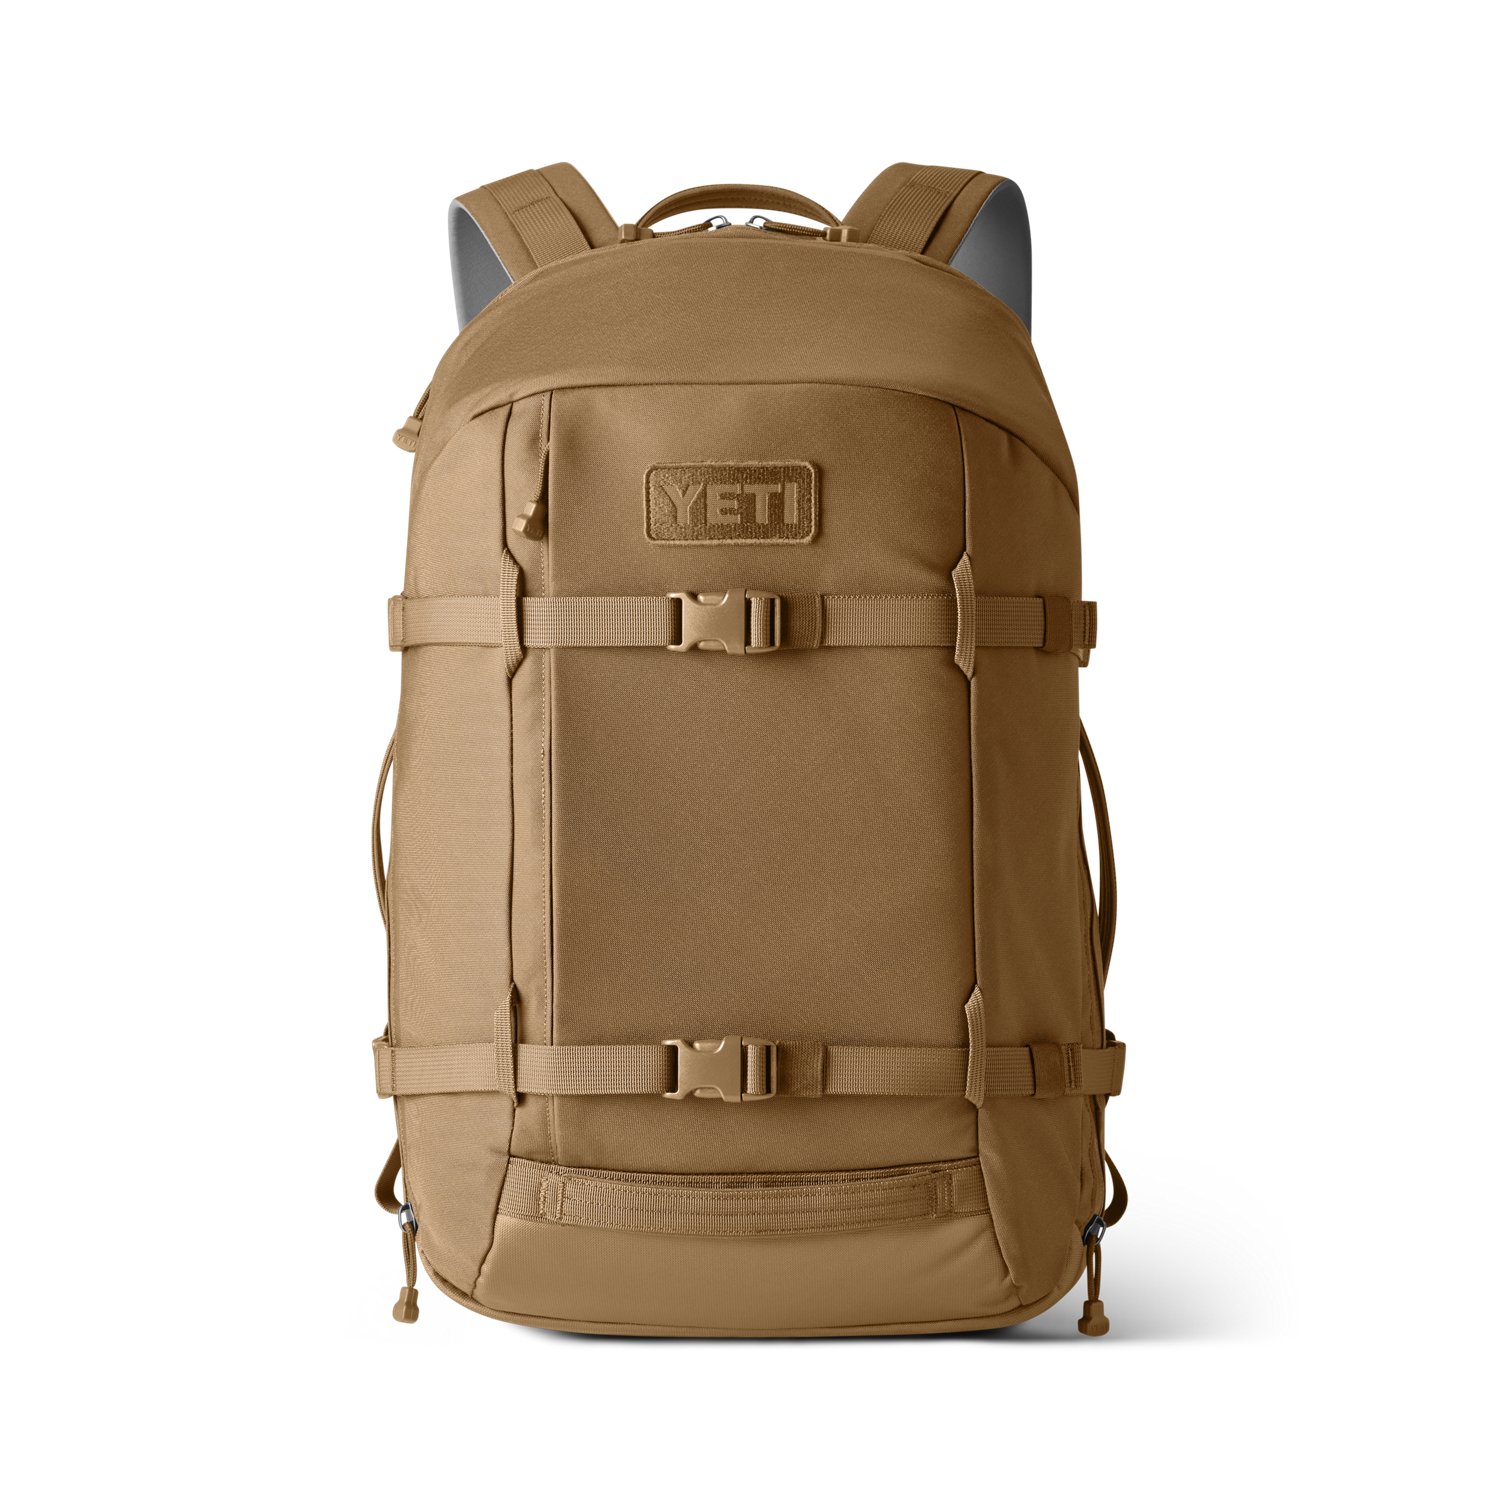 YETI Crossroads 27L Backpack                                                                                                     - view number 1 selected